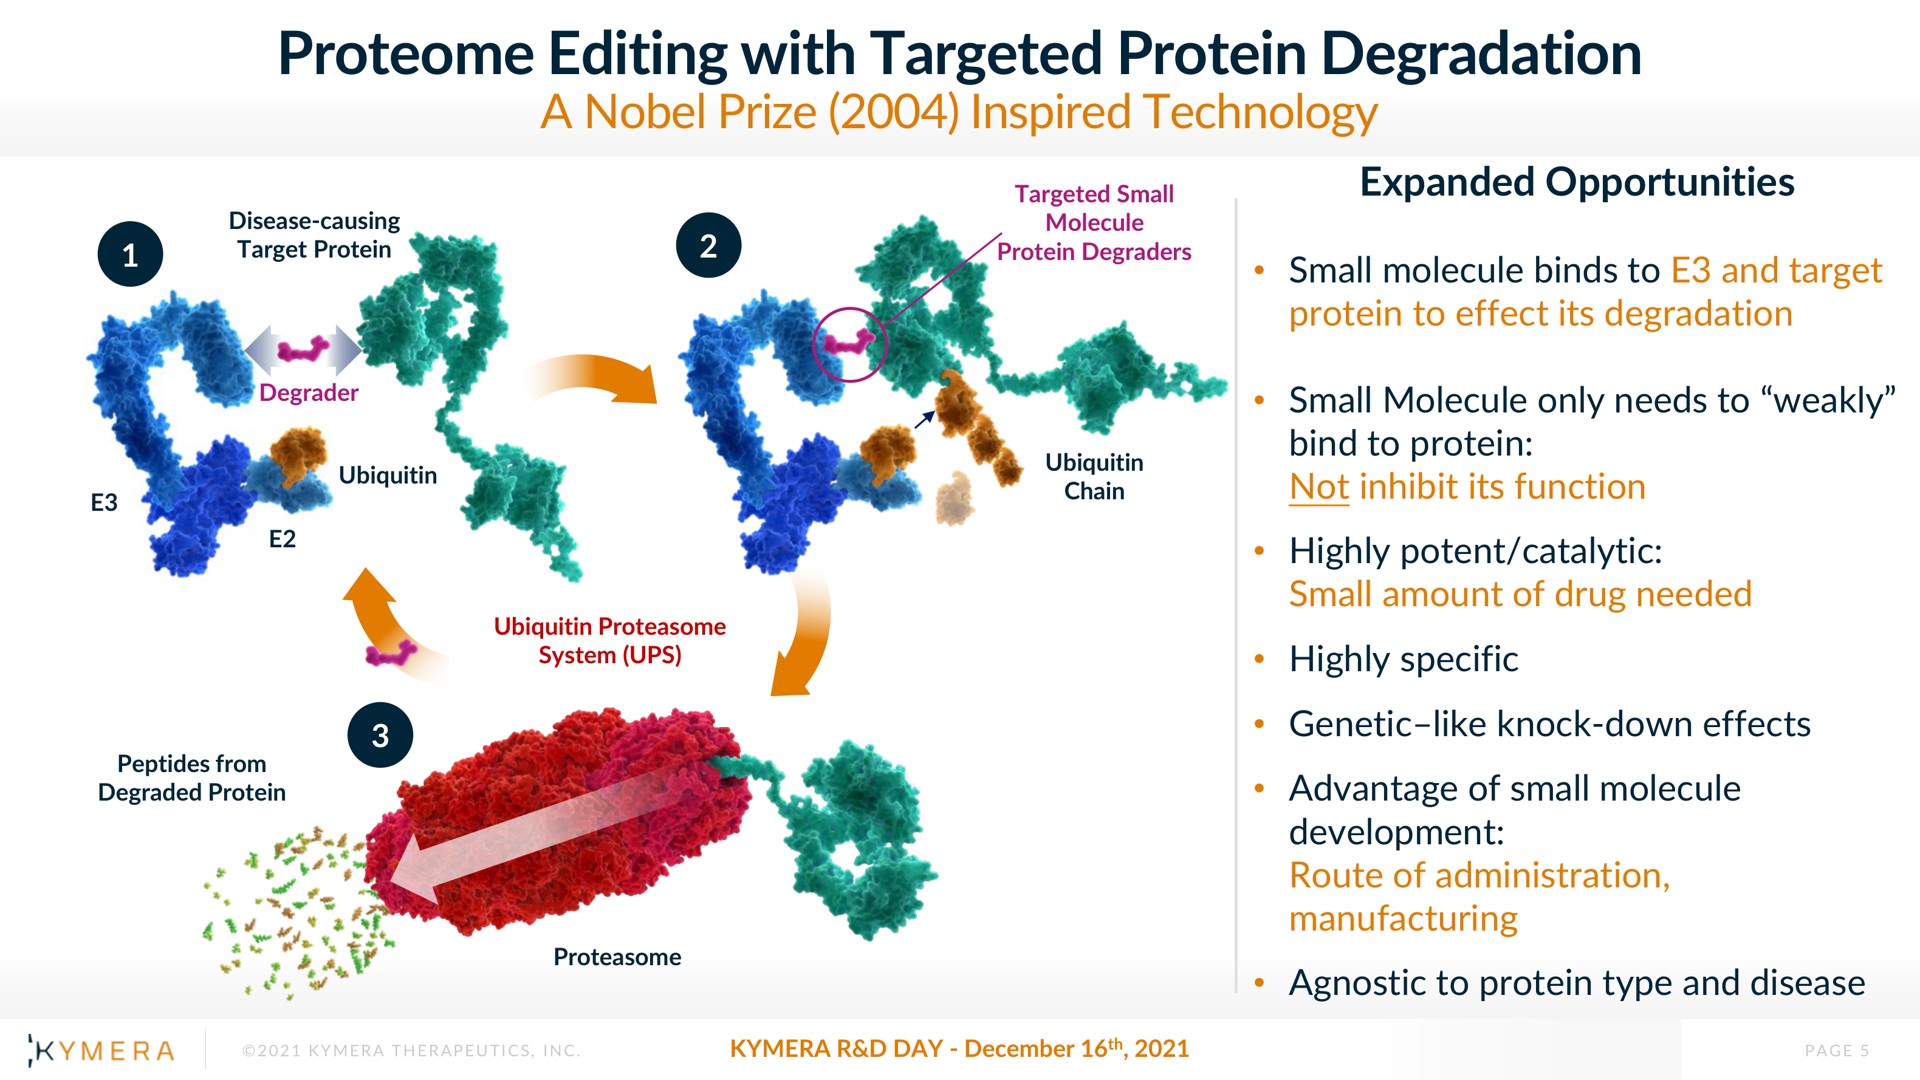 editing with targeted protein degradation | Kymera